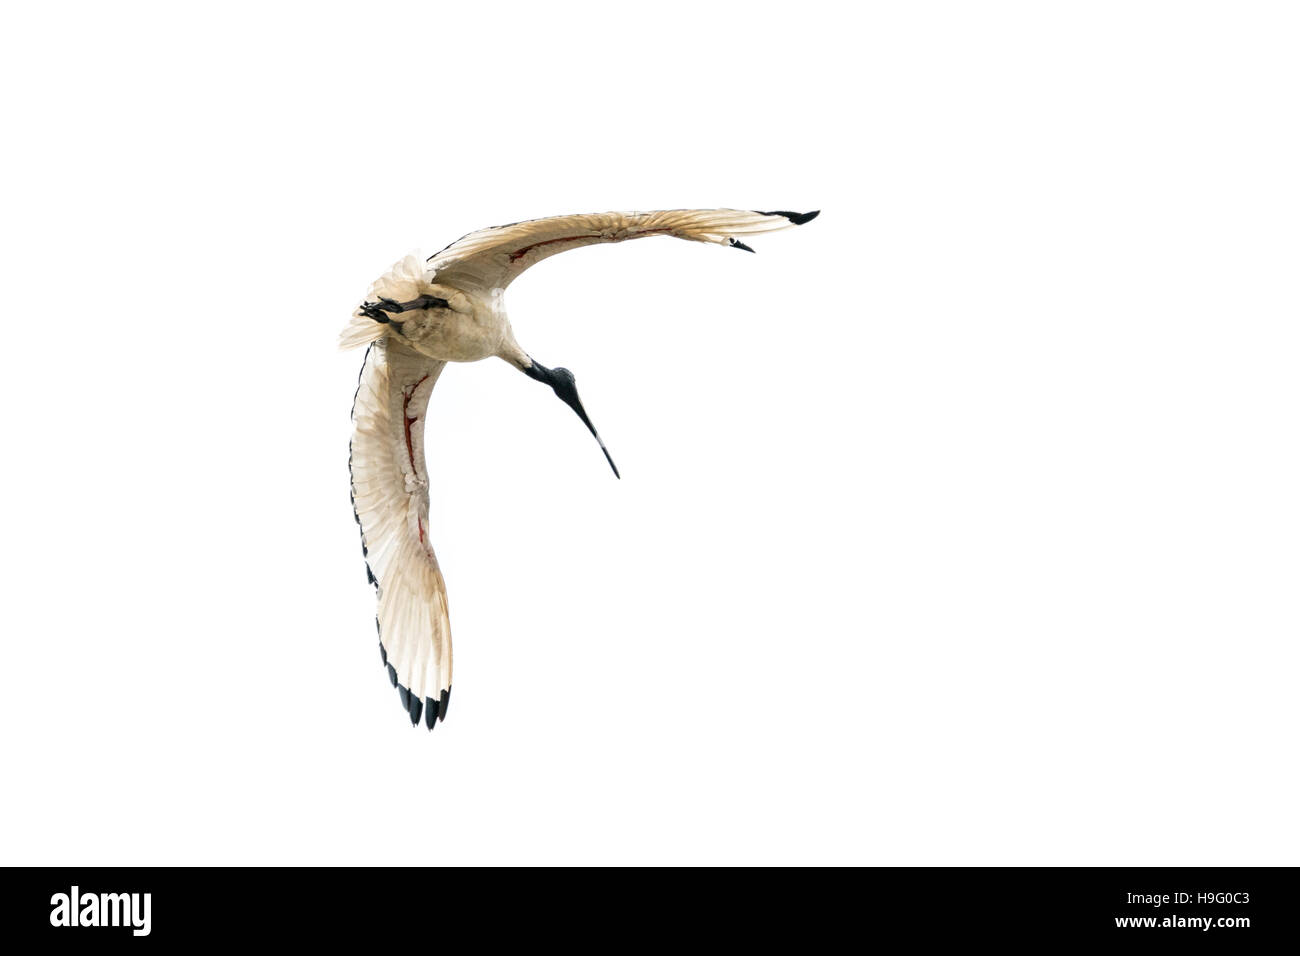 A white Ibis flying in the air with its wings spread Stock Photo